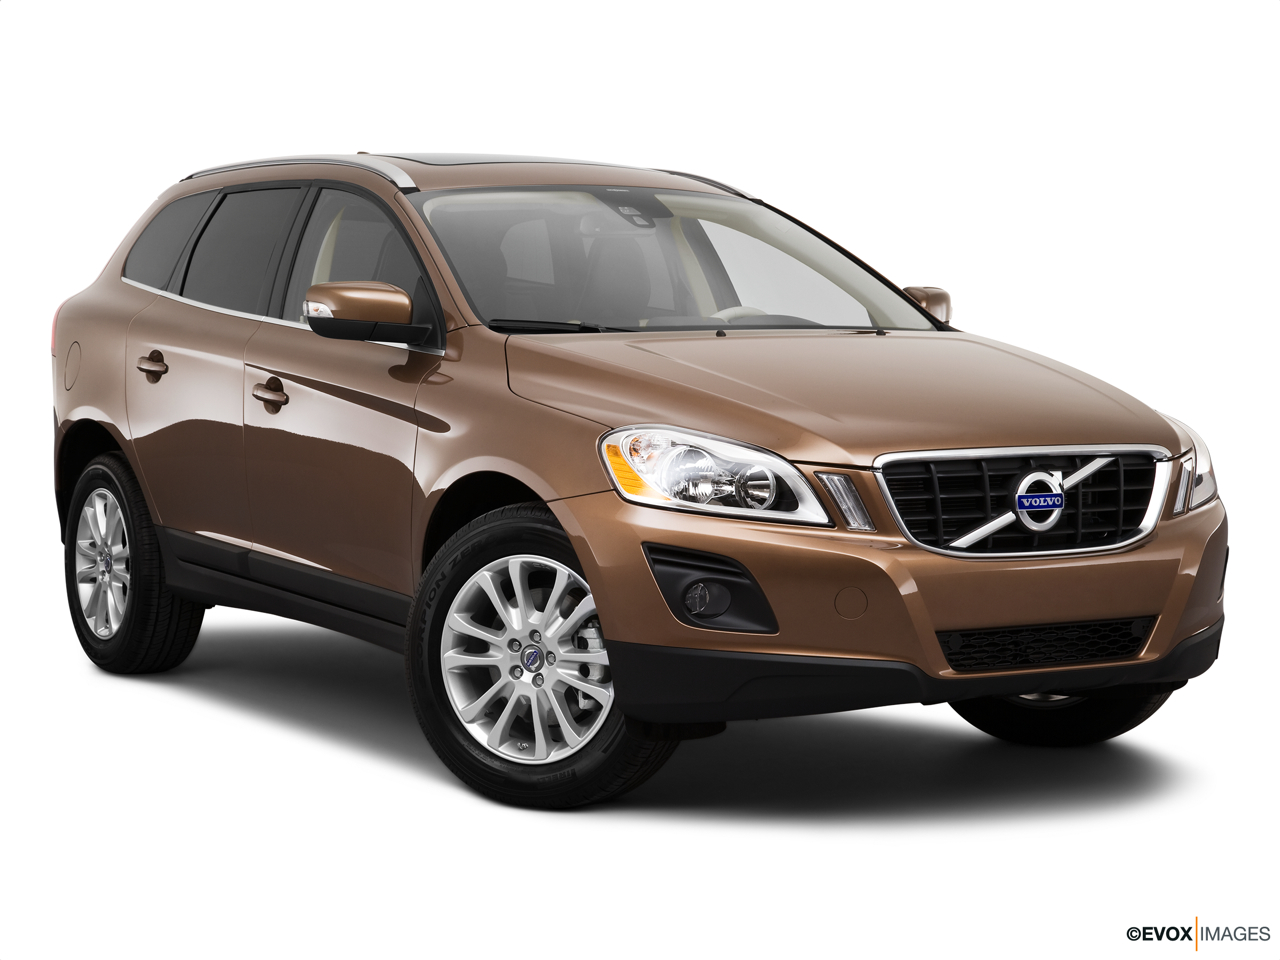 2010 Volvo XC60 T6 AWD Front passenger 3/4 w/ wheels turned. 